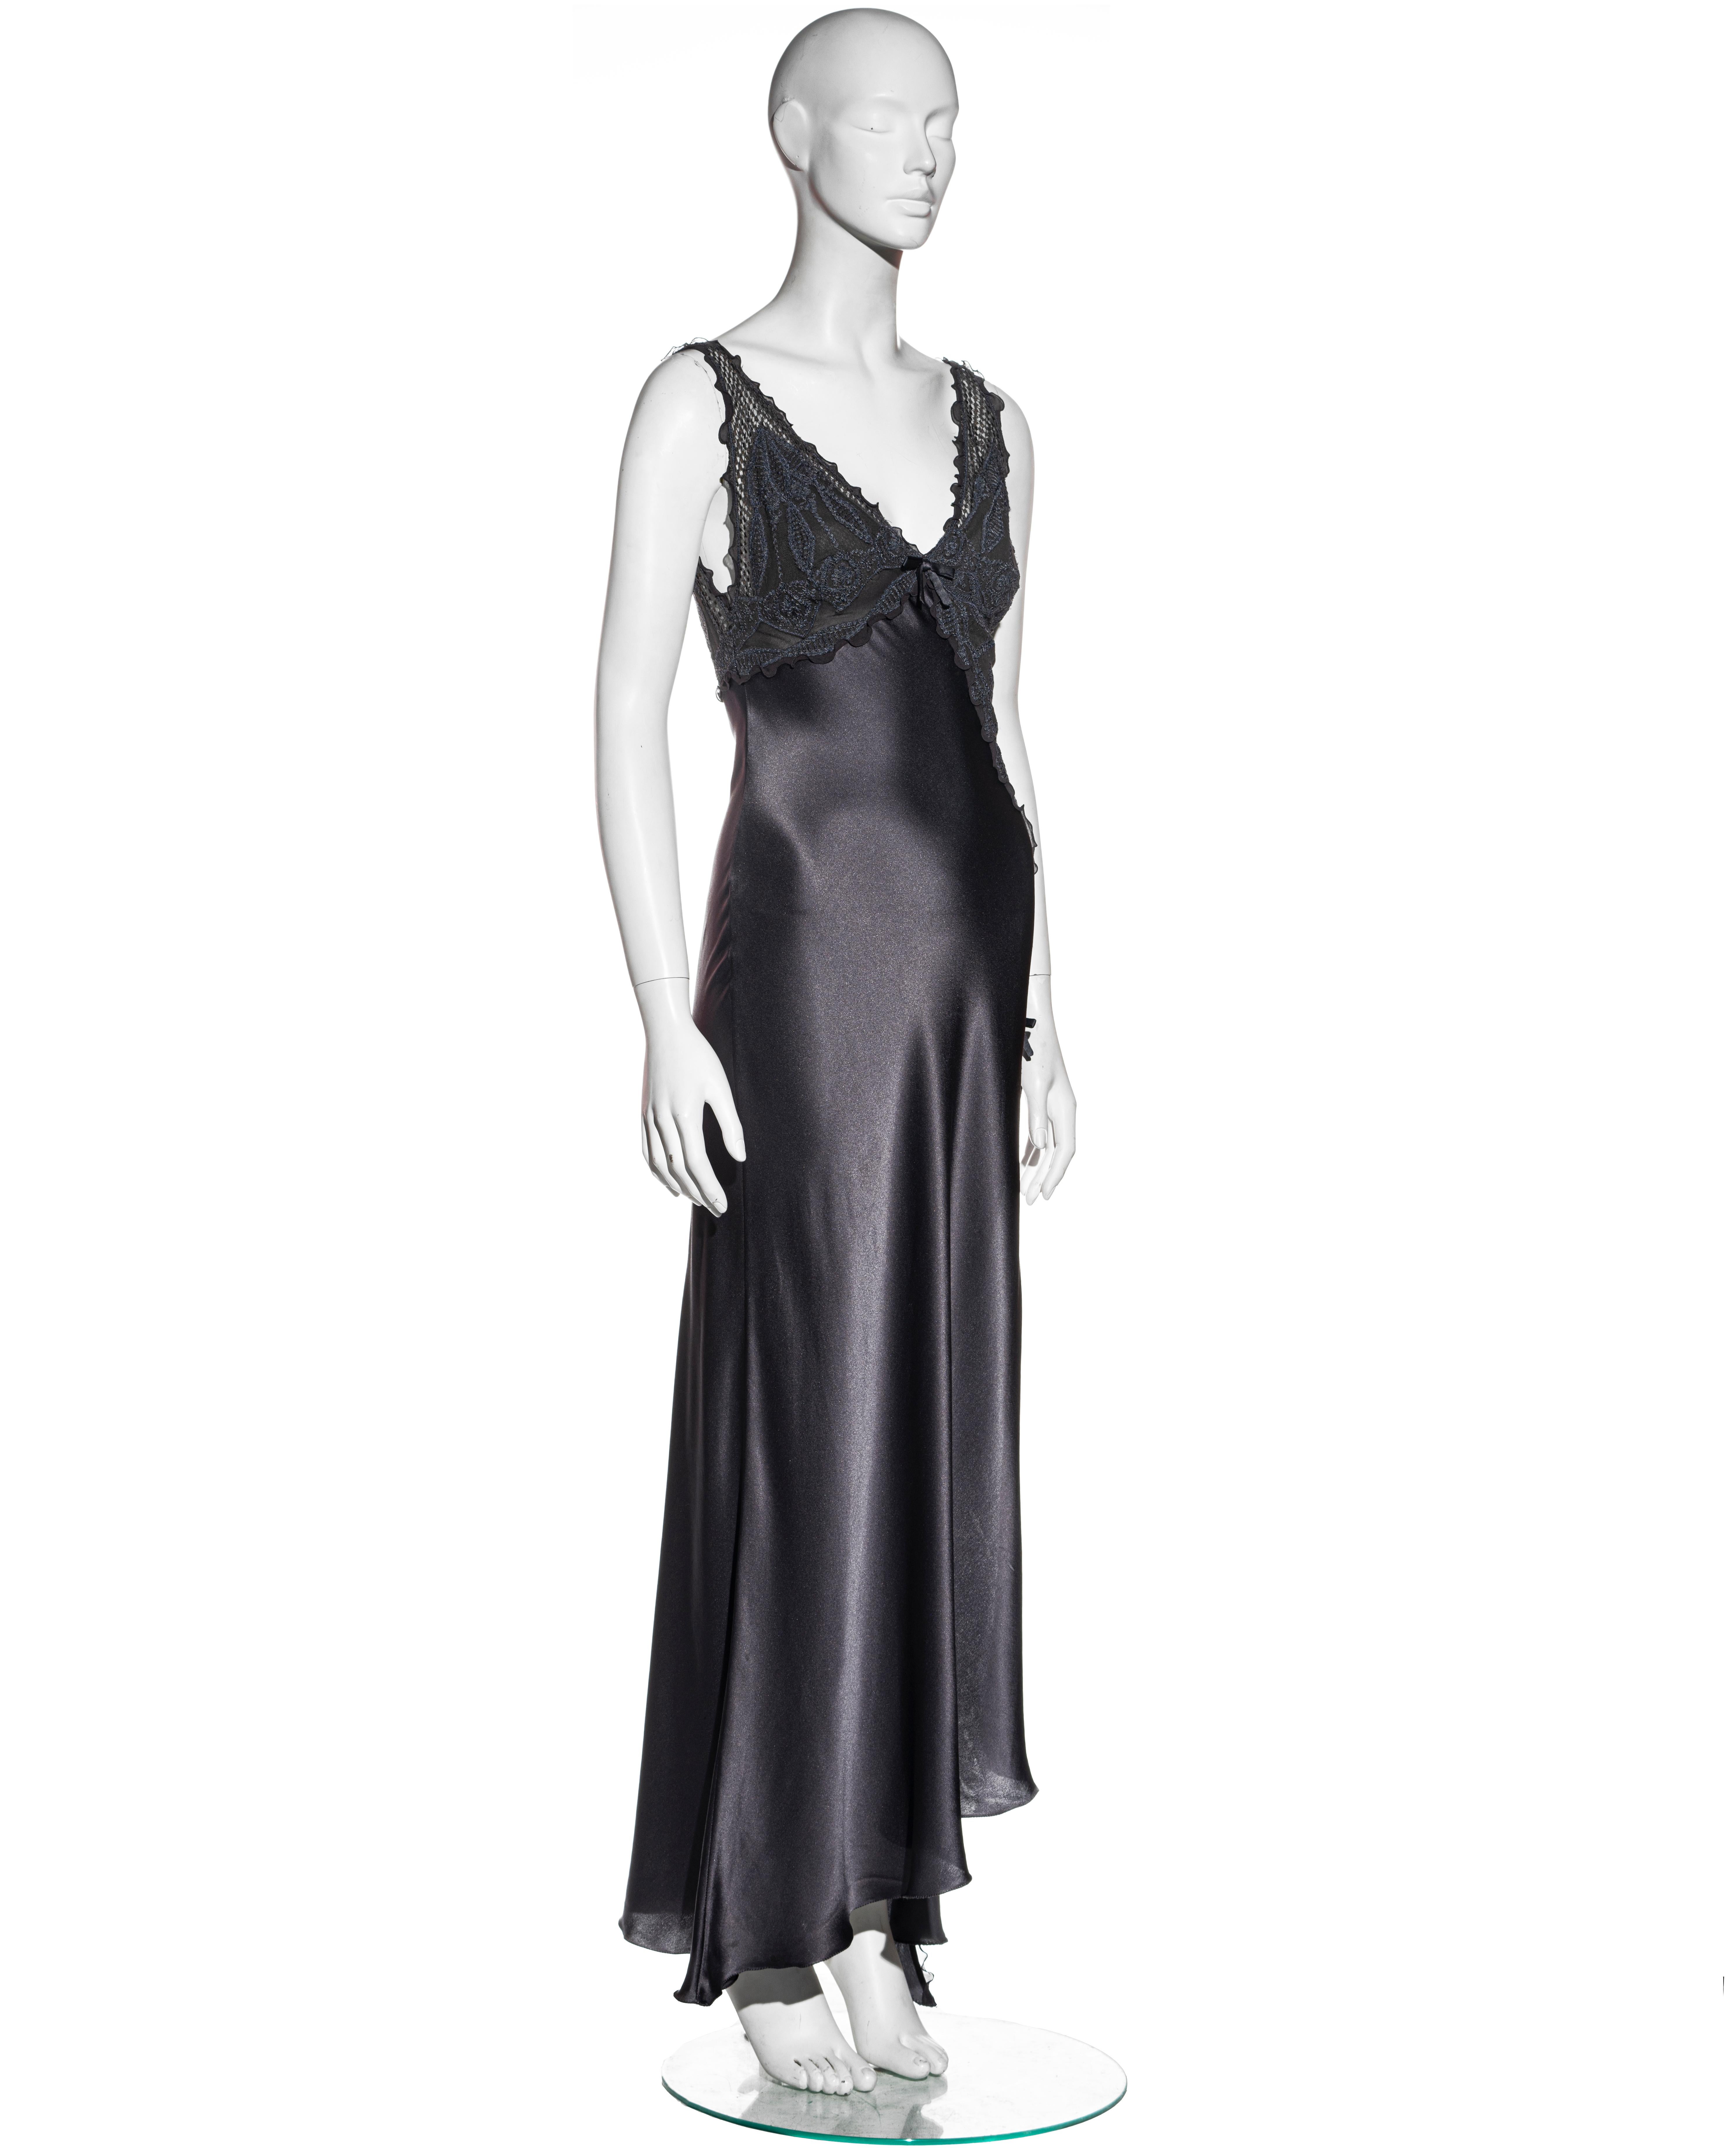 Women's Gianni Versace grey silk and lace evening dress with high leg slit, ss 1997